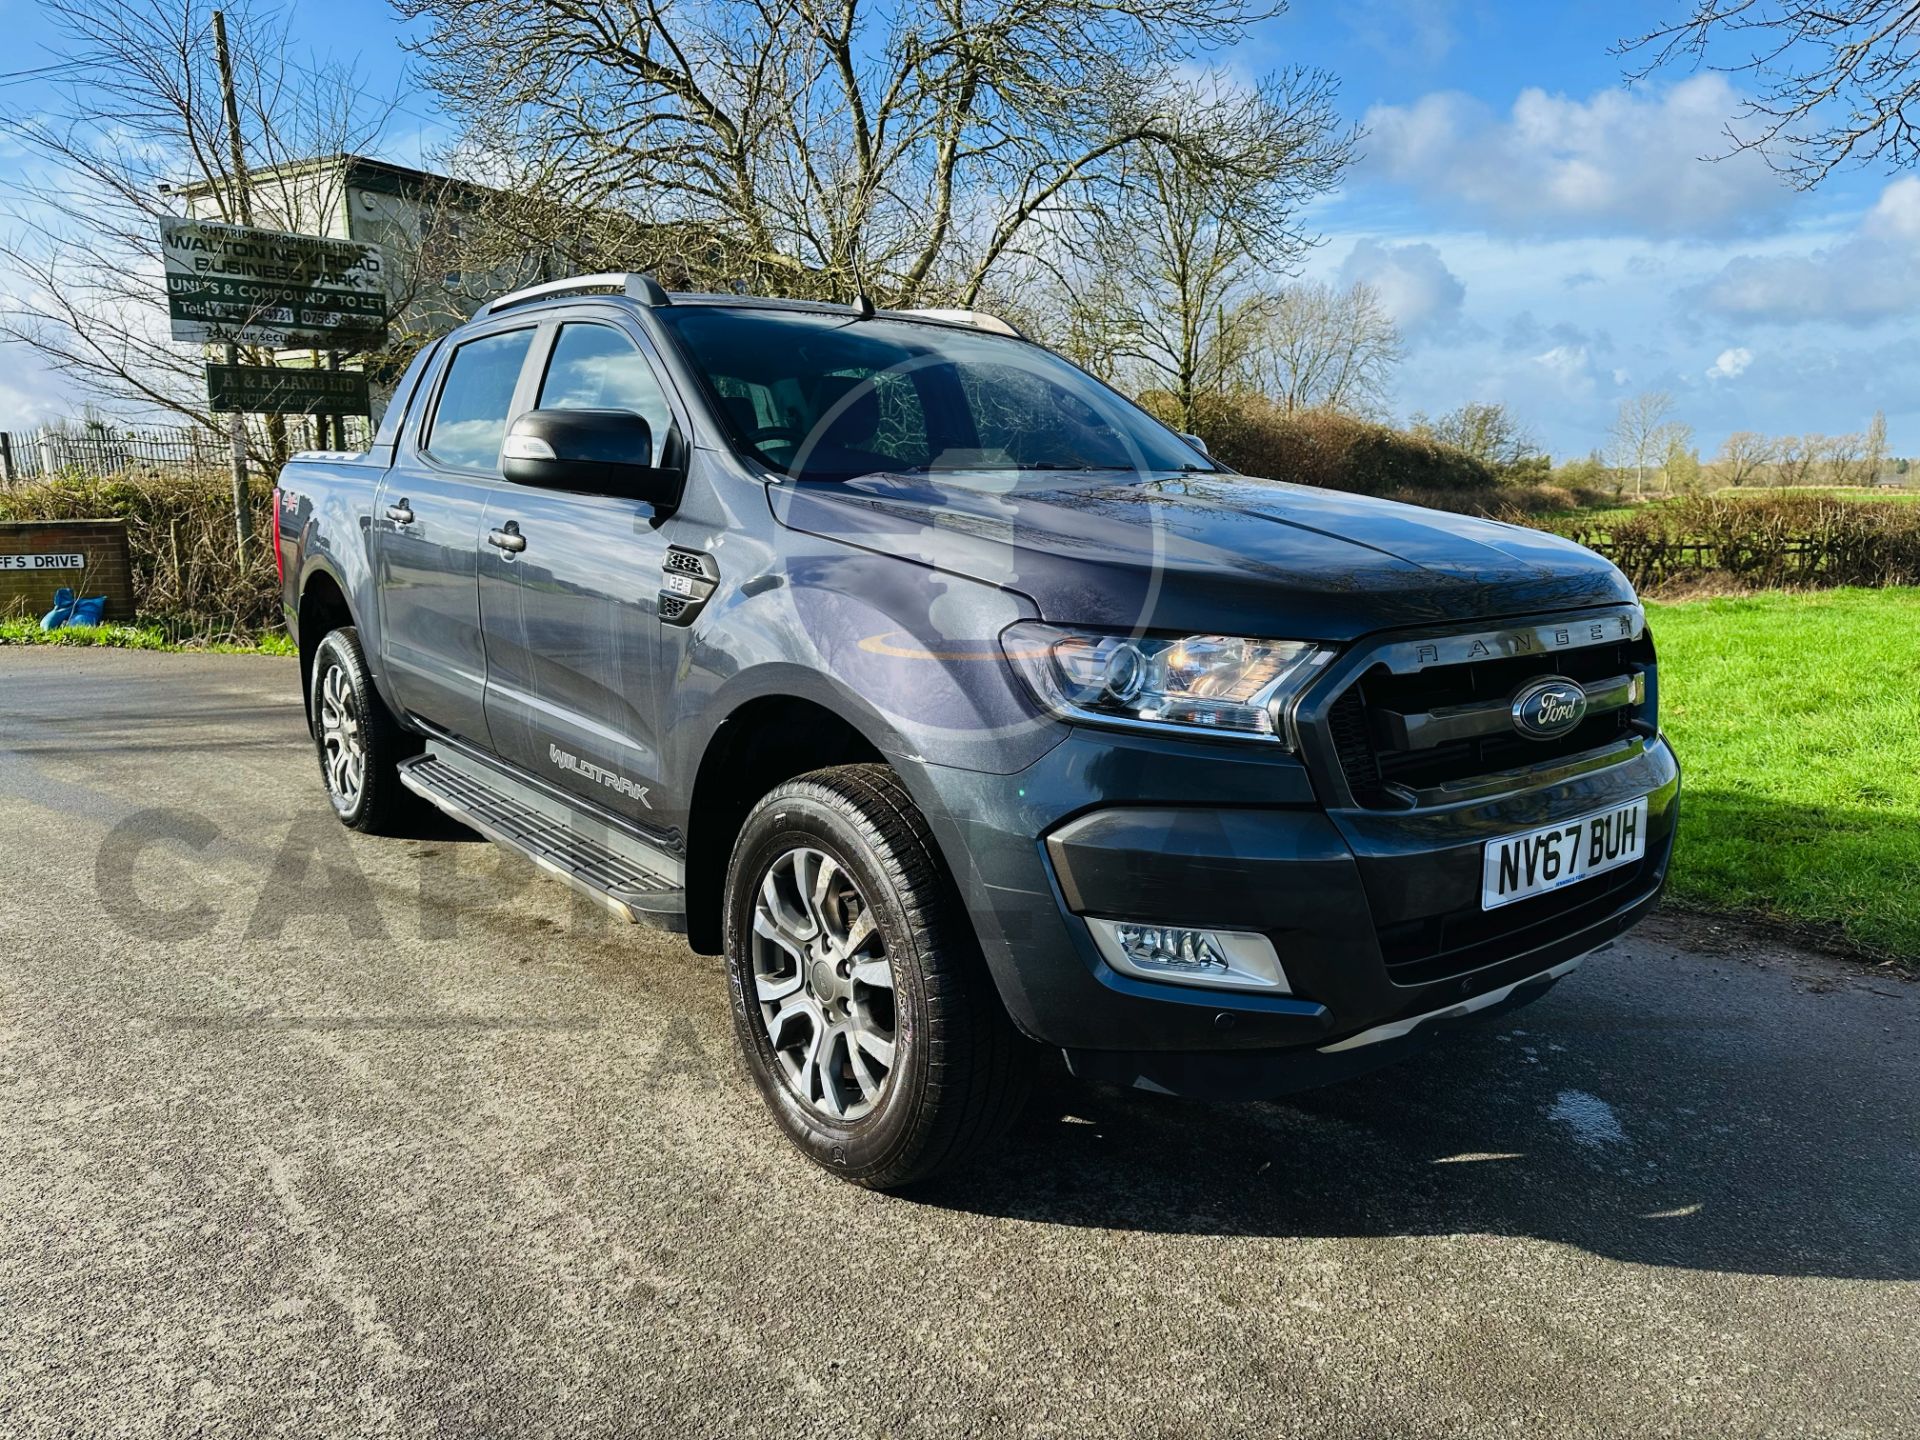 FORD RANGER *WILDTRAK EDITION* DOUBLE CAB PICK-UP (2018 - EURO 6) 3.2 TDCI - AUTOMATIC (1 OWNER) - Image 2 of 37